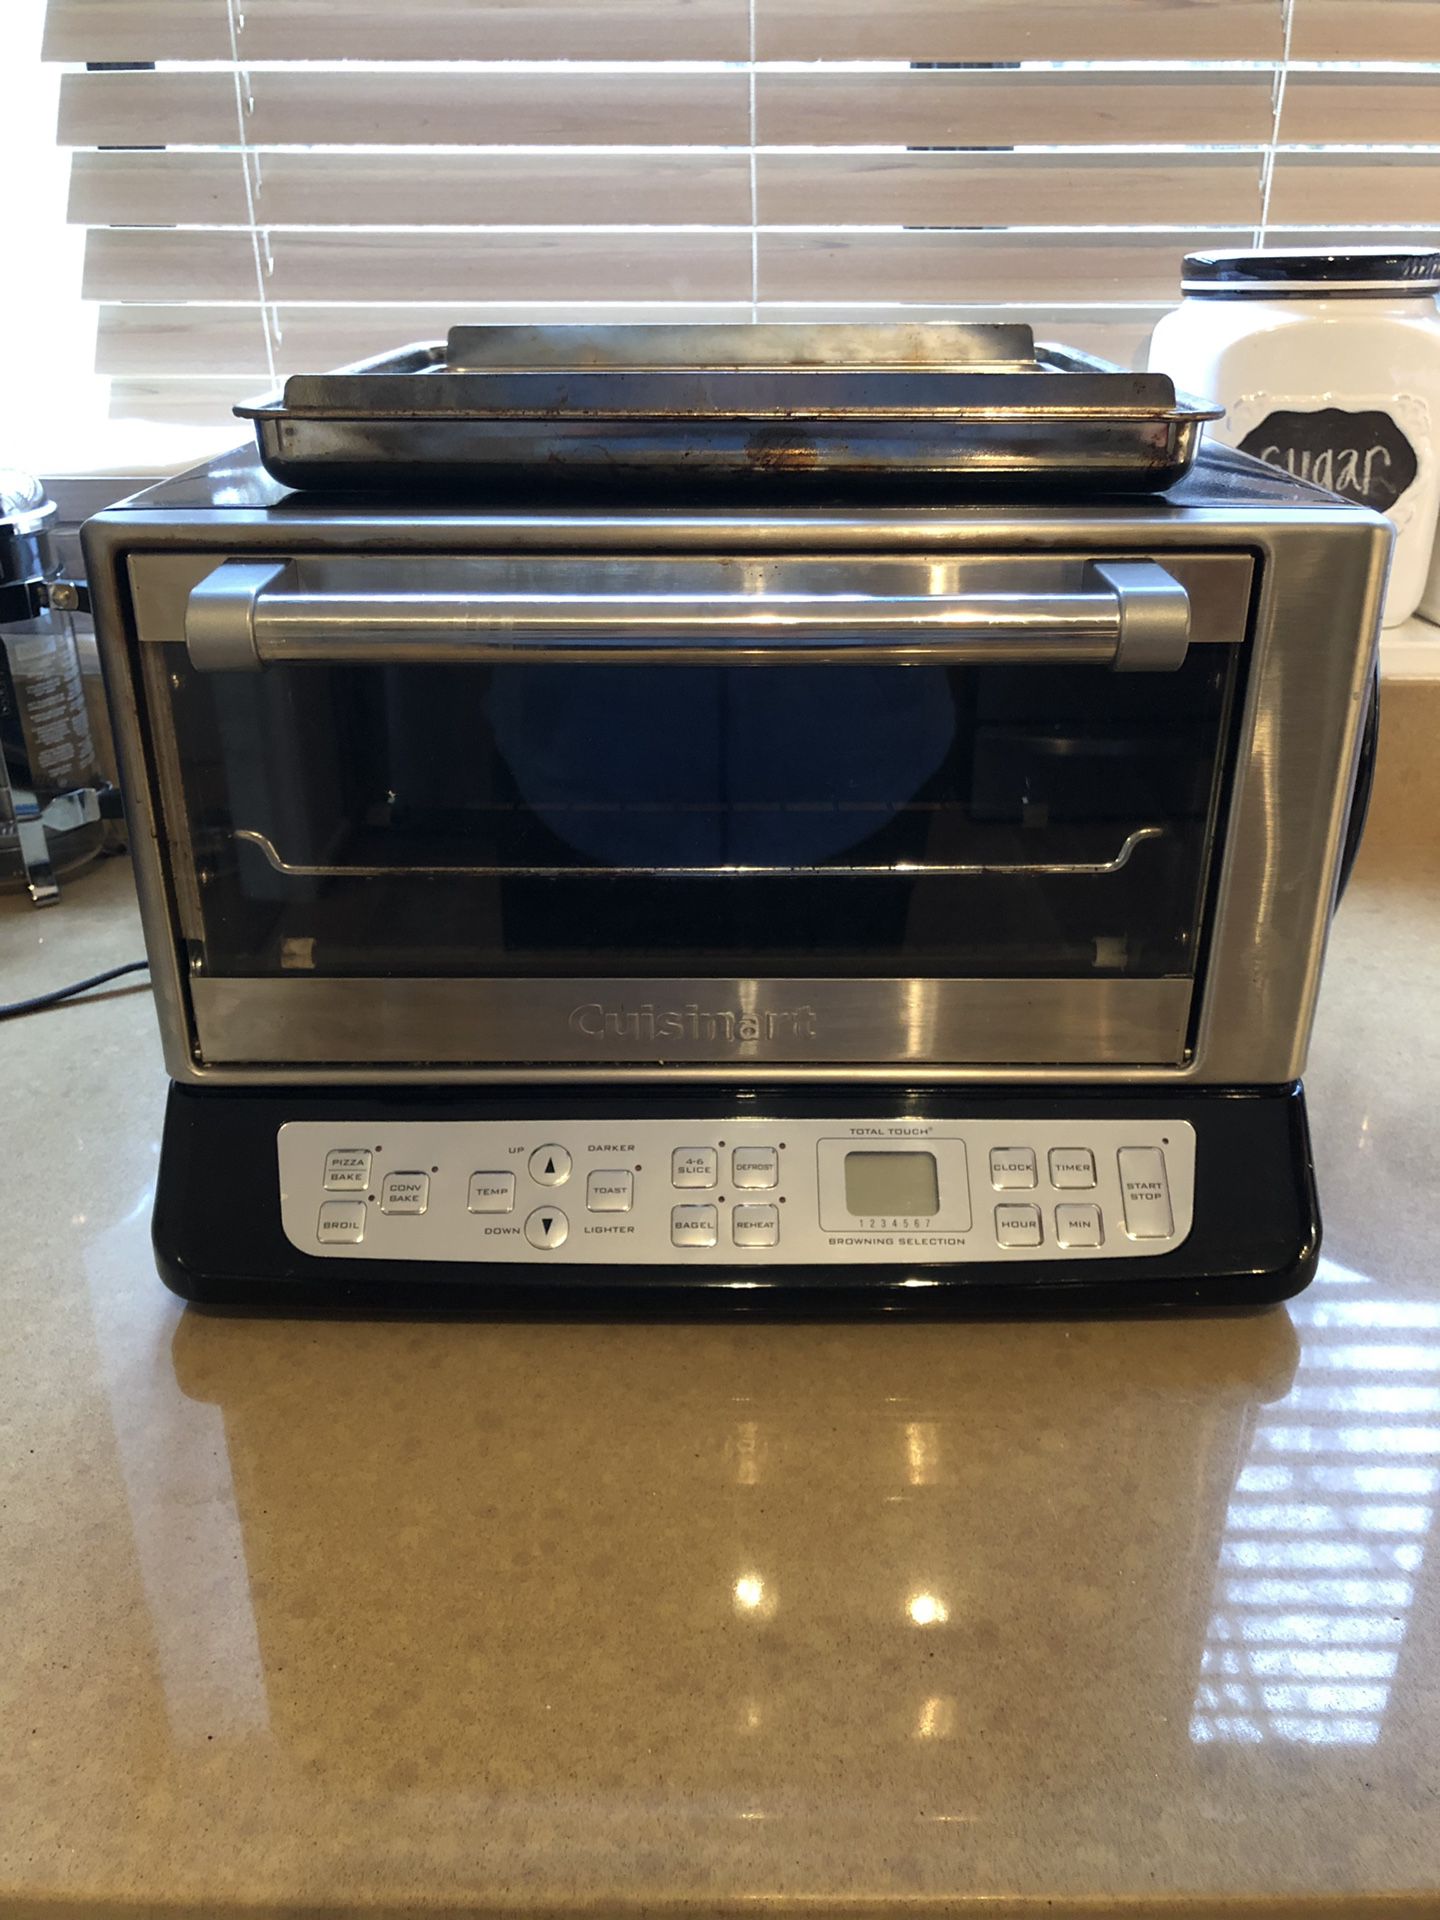 Cuisinart convection toaster oven.